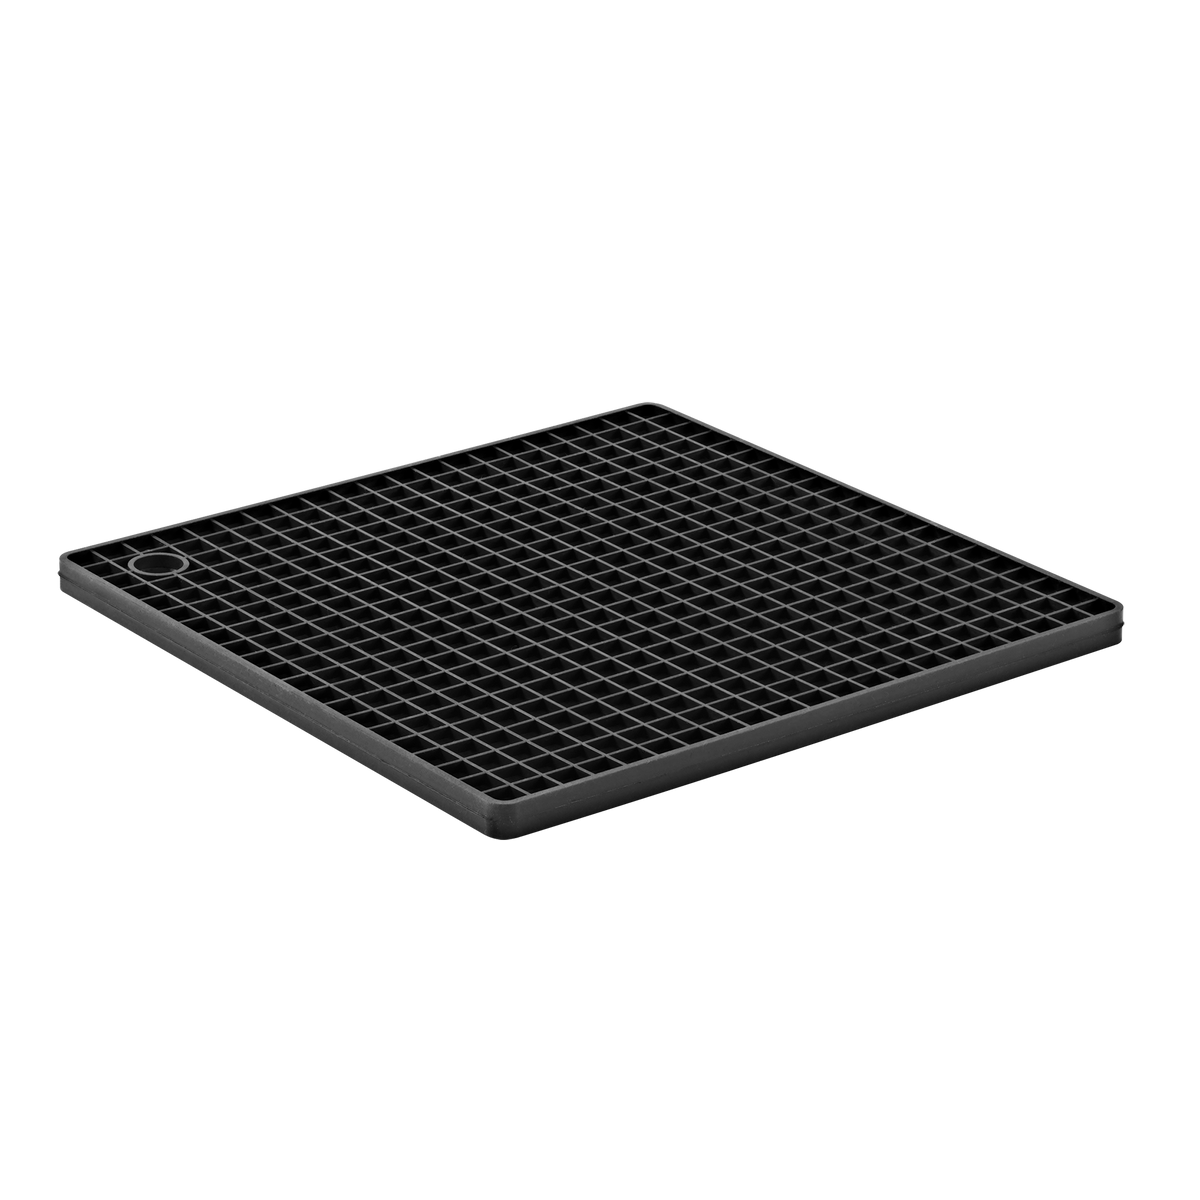 3/4 view, black silicone trivet showing grid pattern and hanging hole.